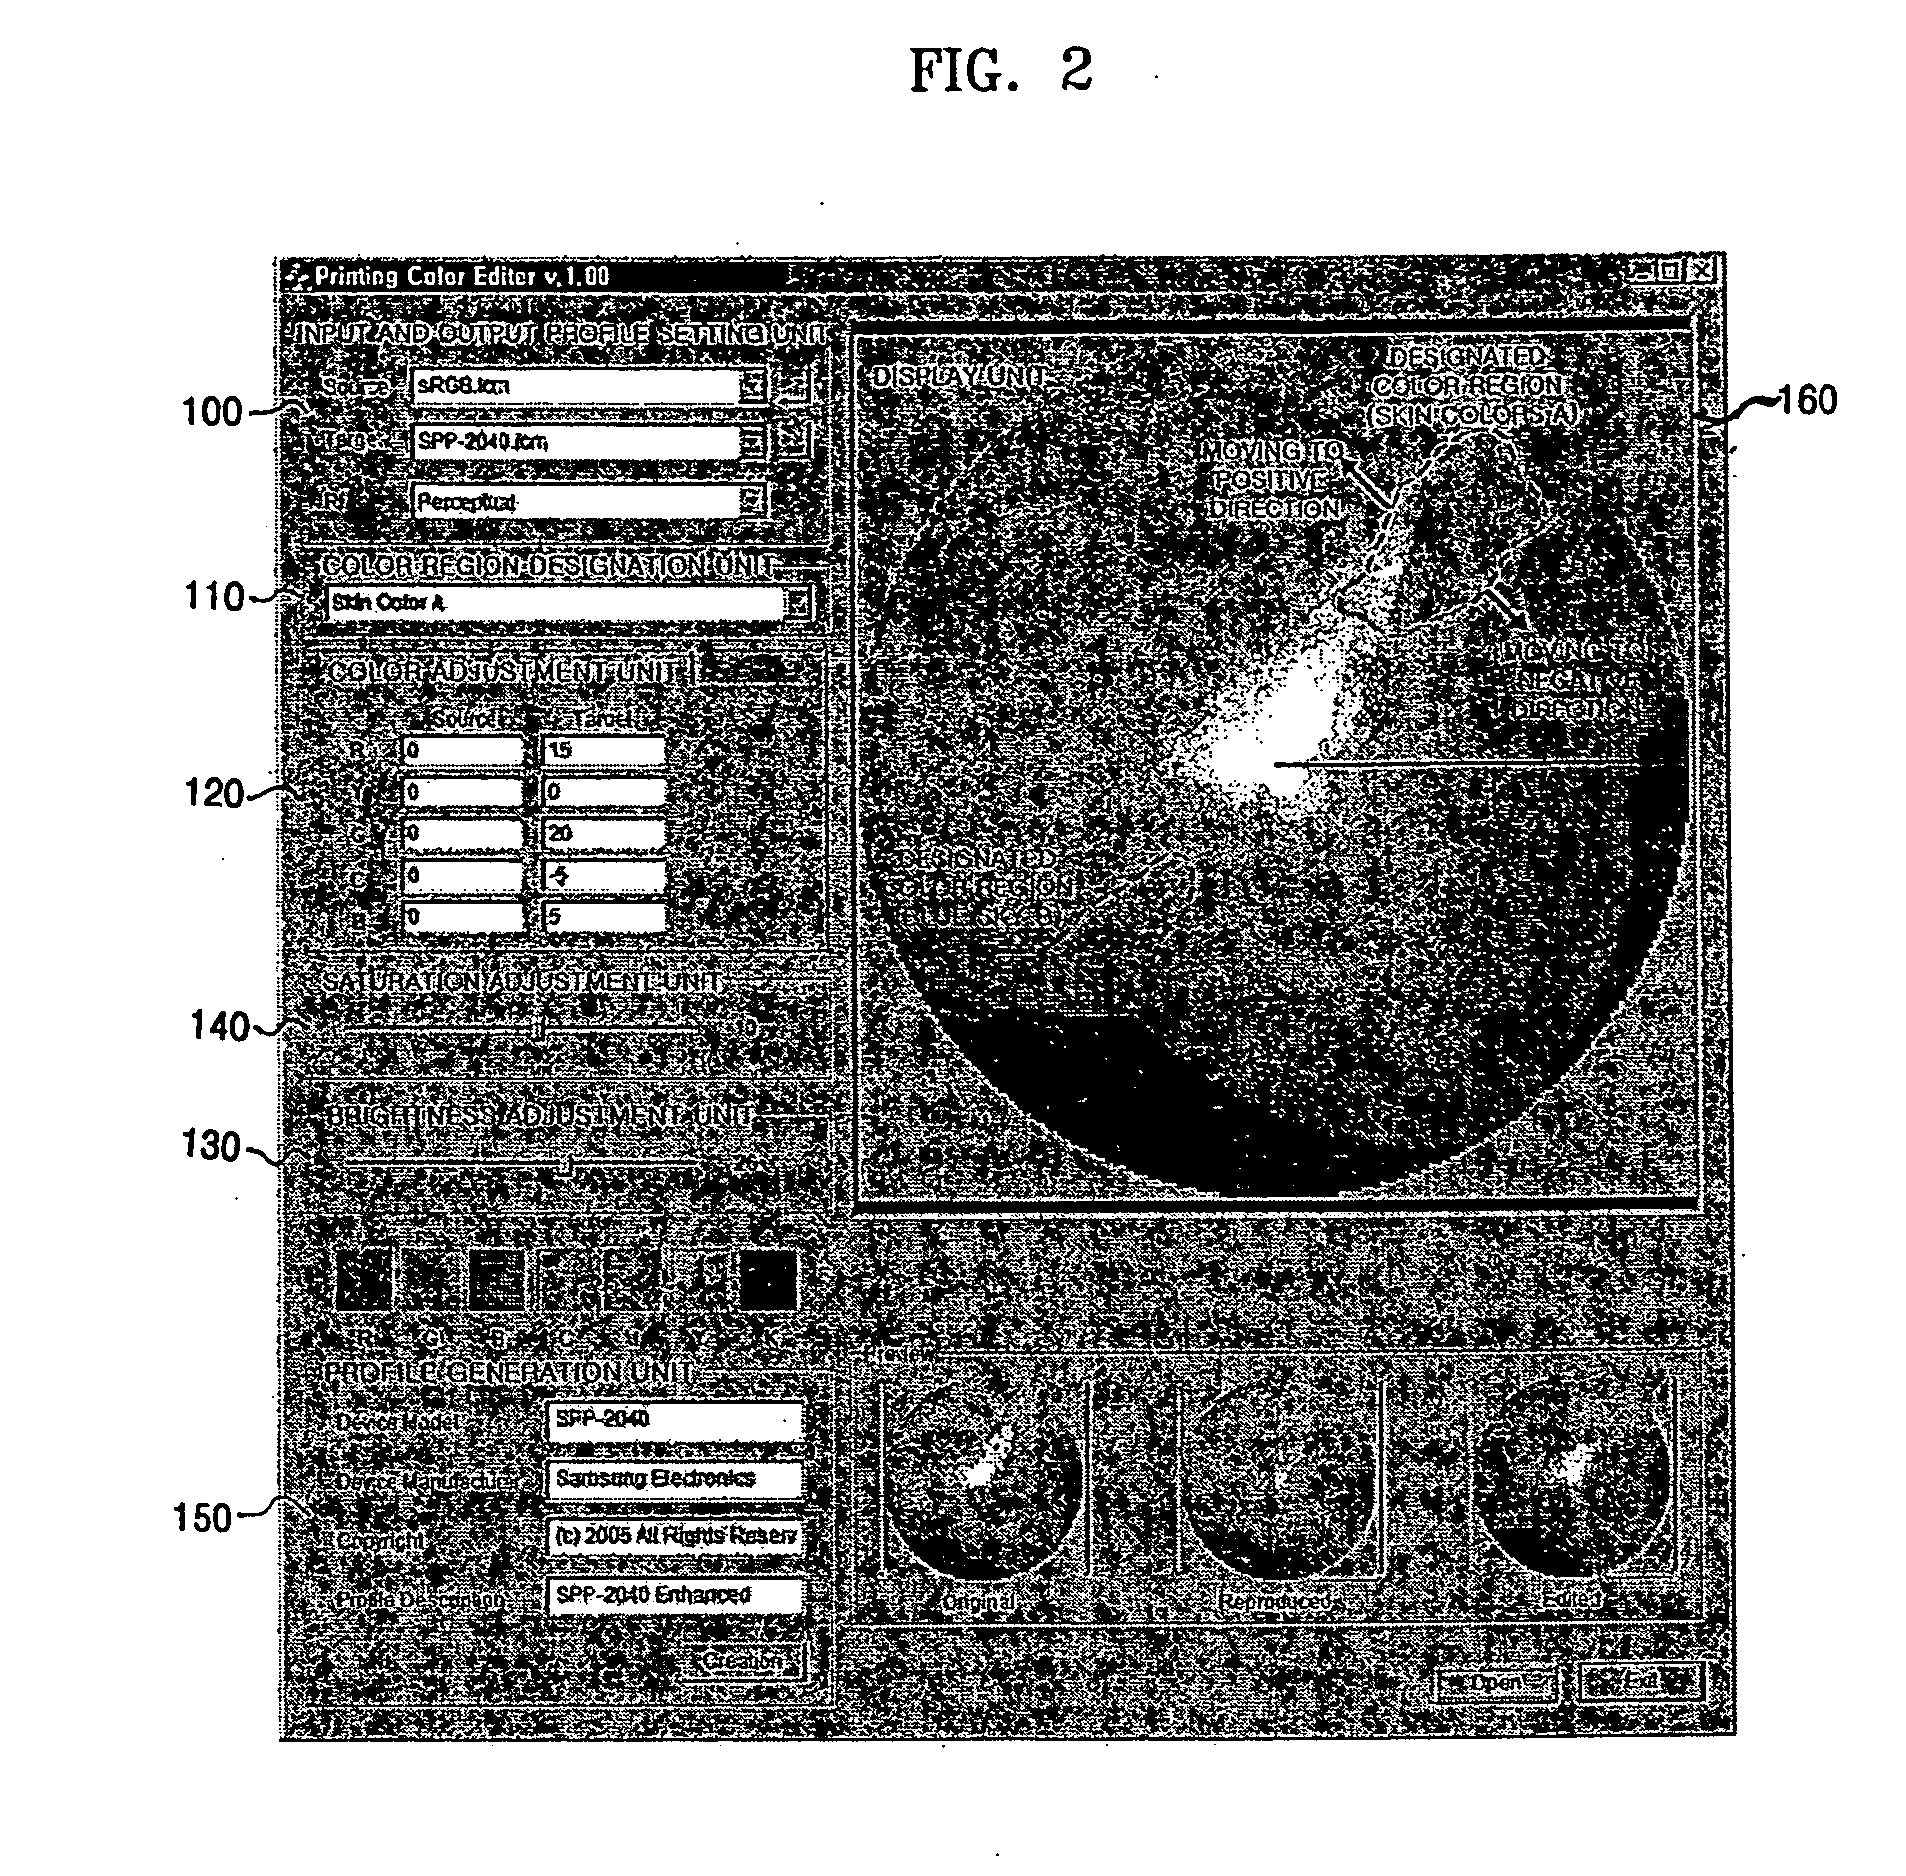 Apparatus and method to edit color profile